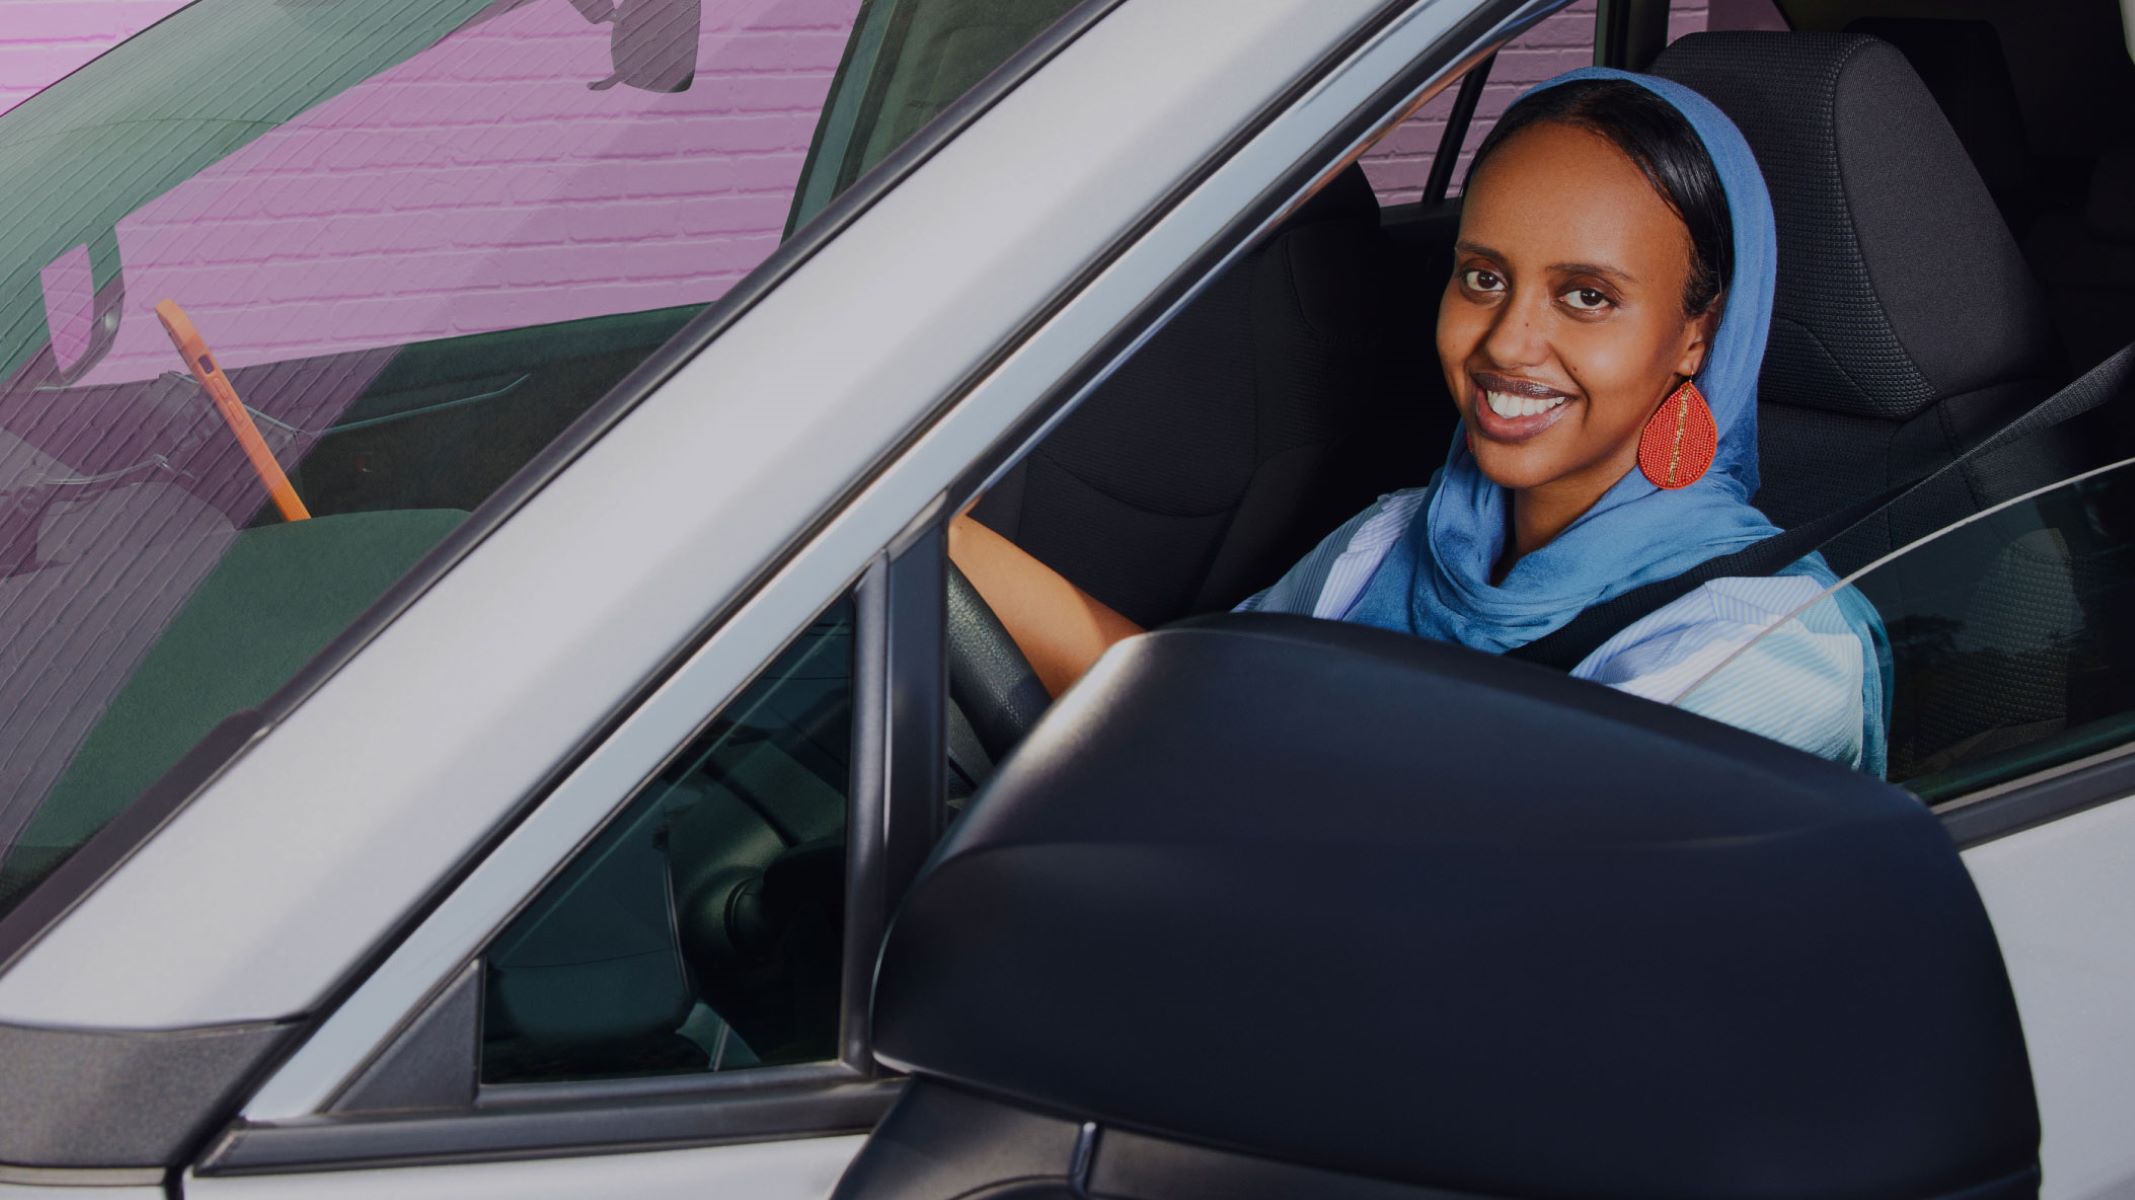 lyfts-new-feature-empowers-women-drivers-to-choose-their-passengers